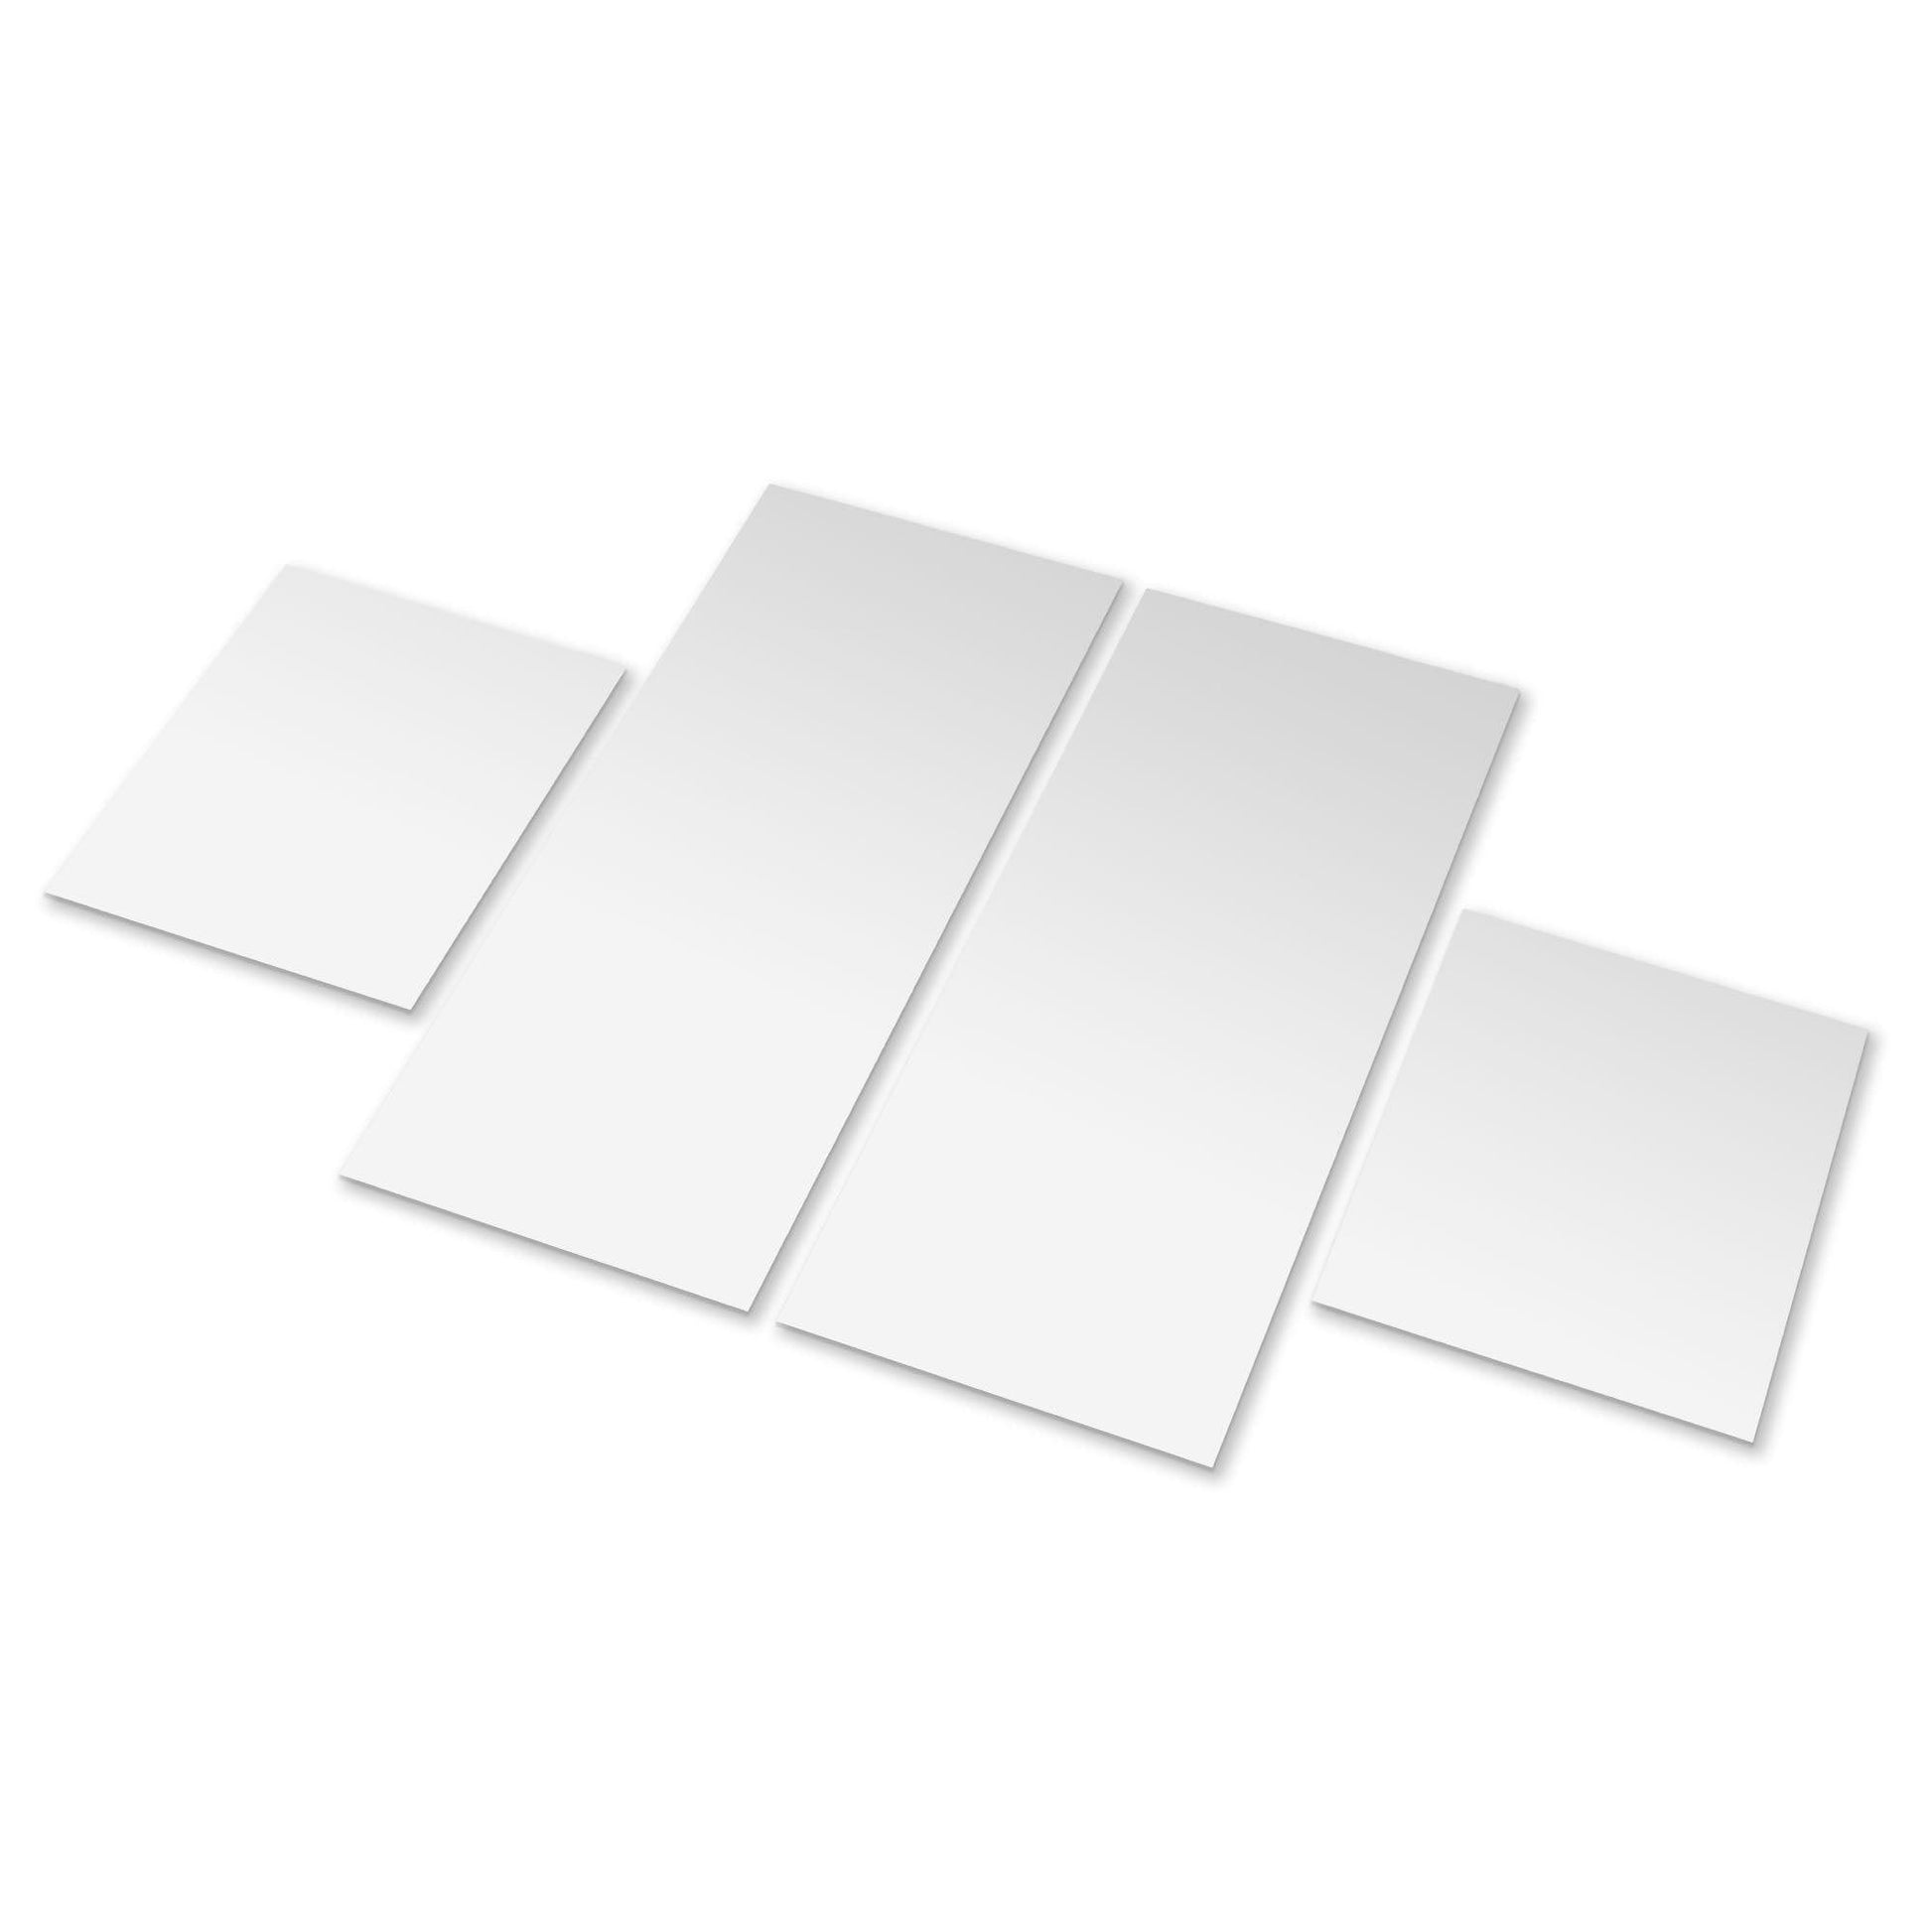 Americanflat Adhesive Mirror Tiles - Exclamation Rectangular Design - Peel  and Stick Mirrors for Wall Frameless Mirrors for Bedroom and Living Room  Decor (4pcs Set)